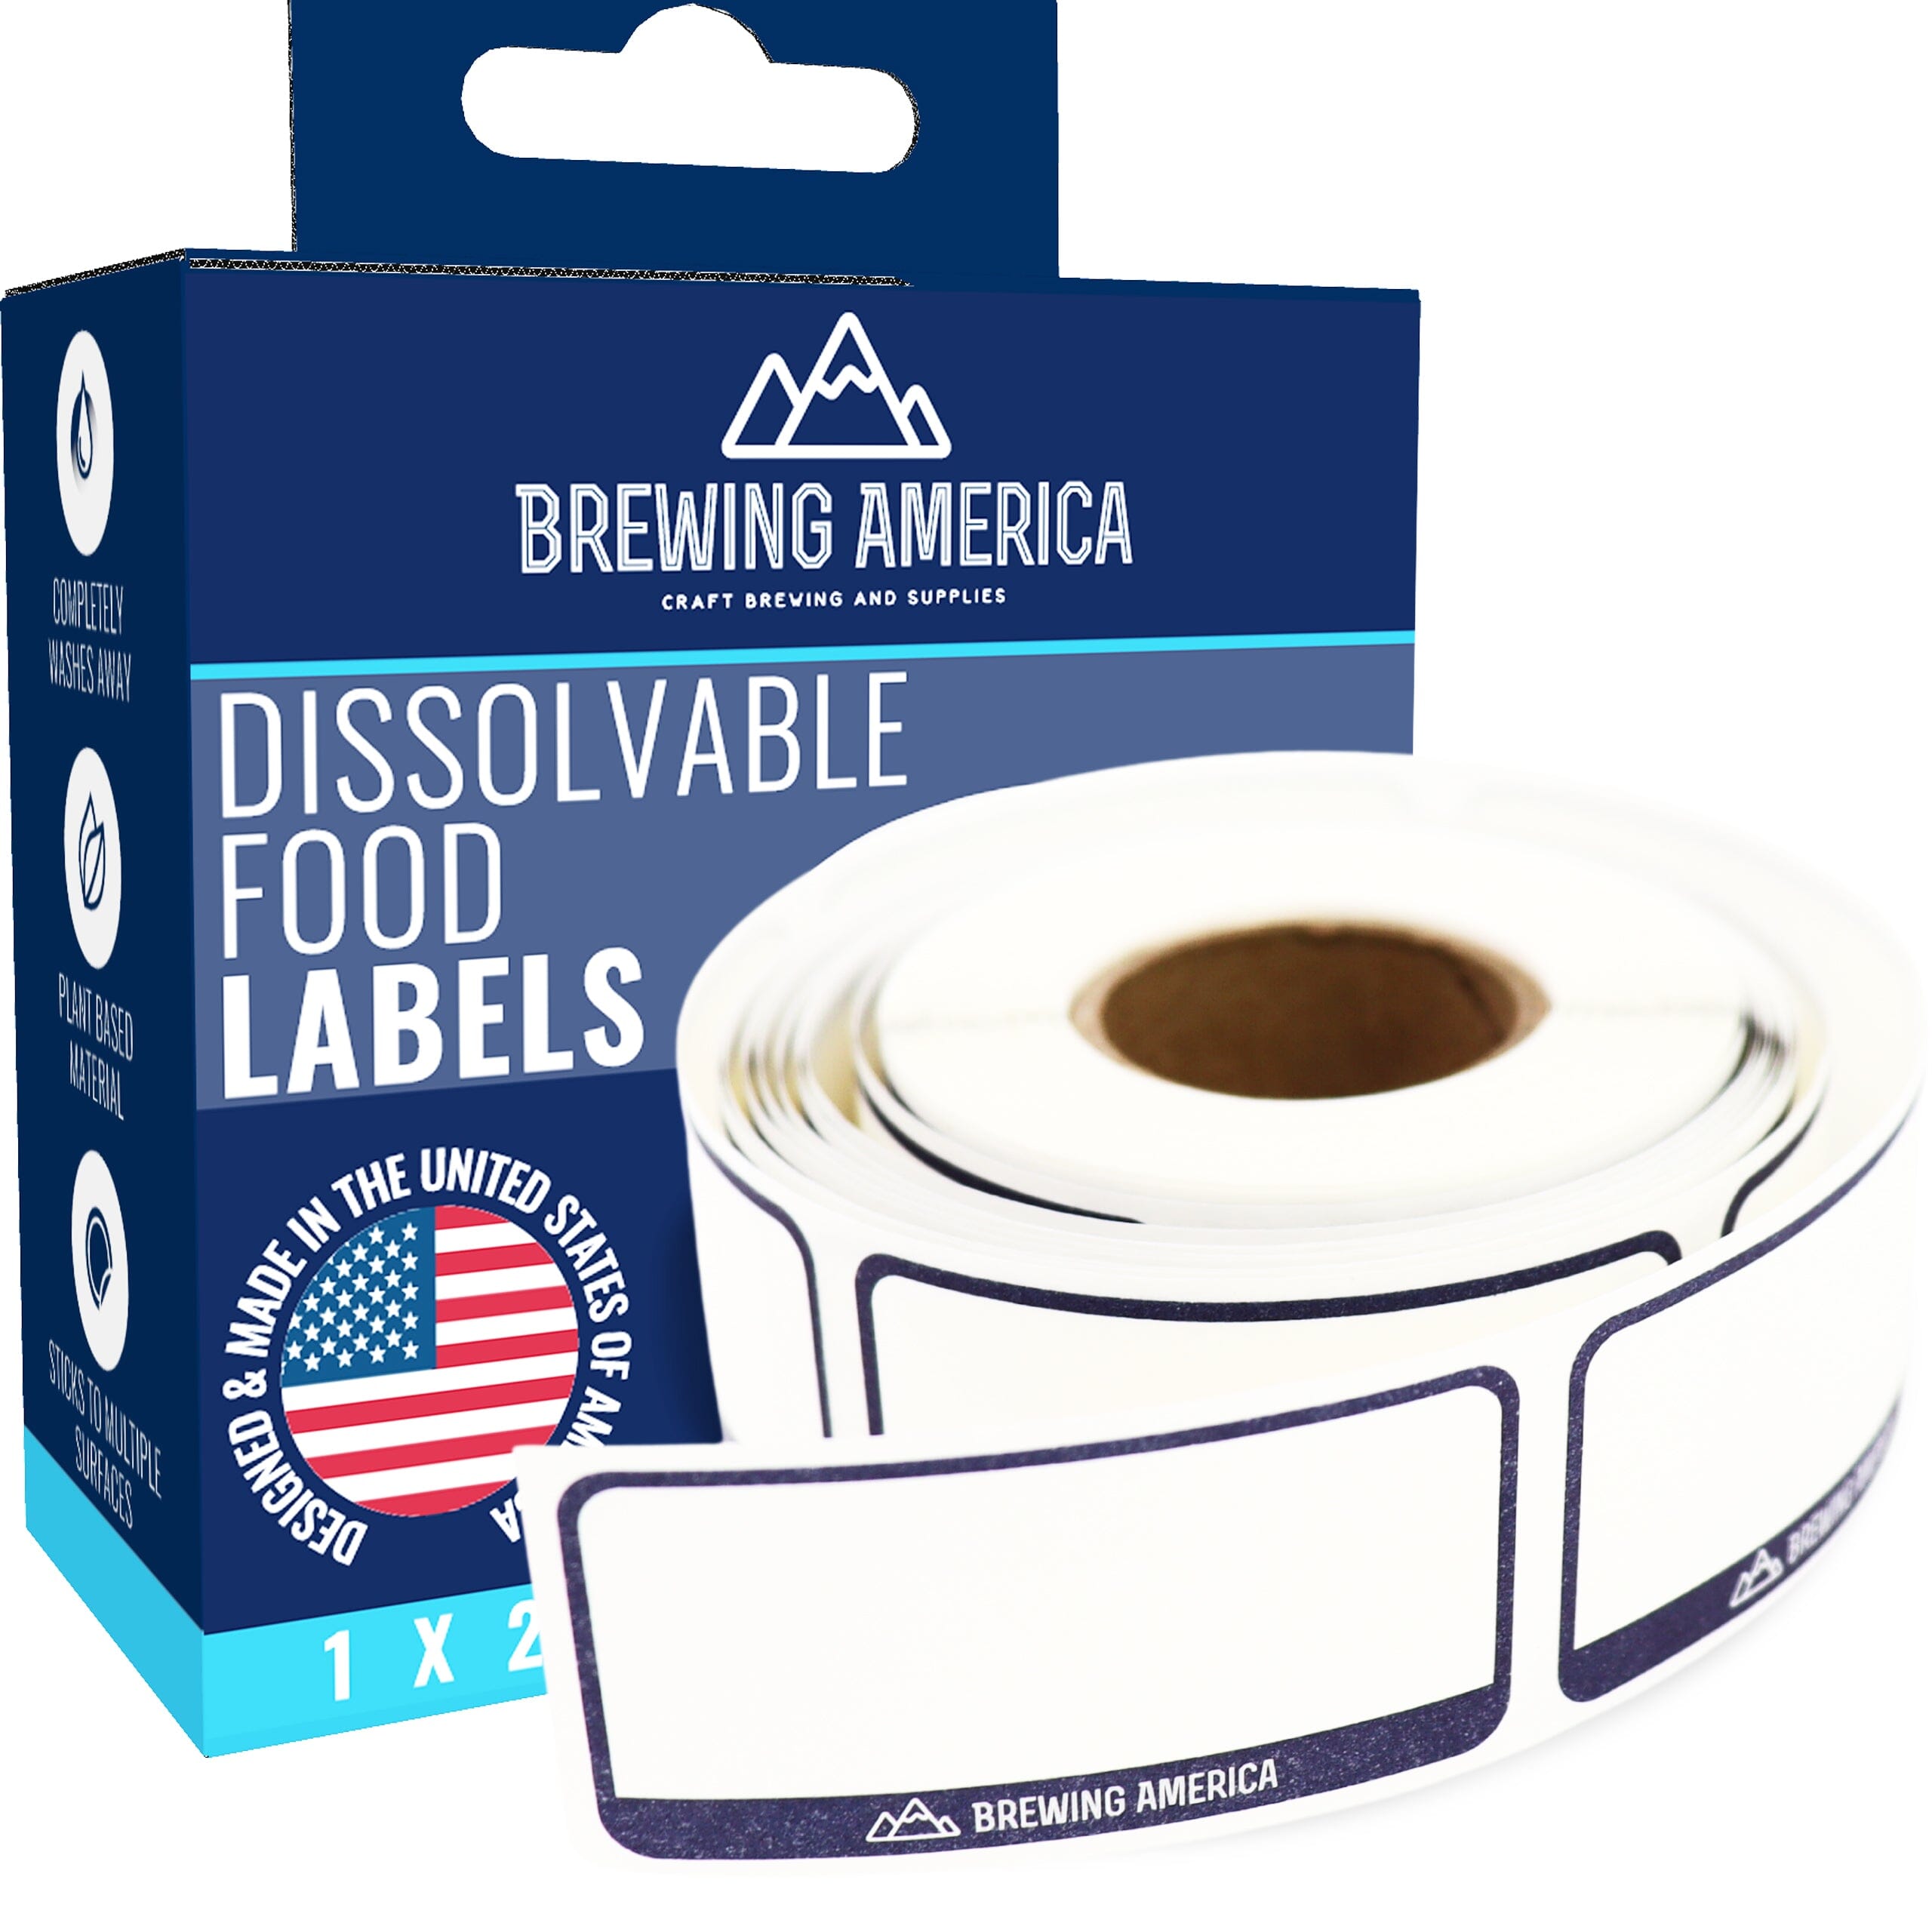 Dissolvable Food Labels for Food Containers Glass, Plastic or Metal No Scrubbing, No Residue - Old Glory Blue Accessories Brewing America 